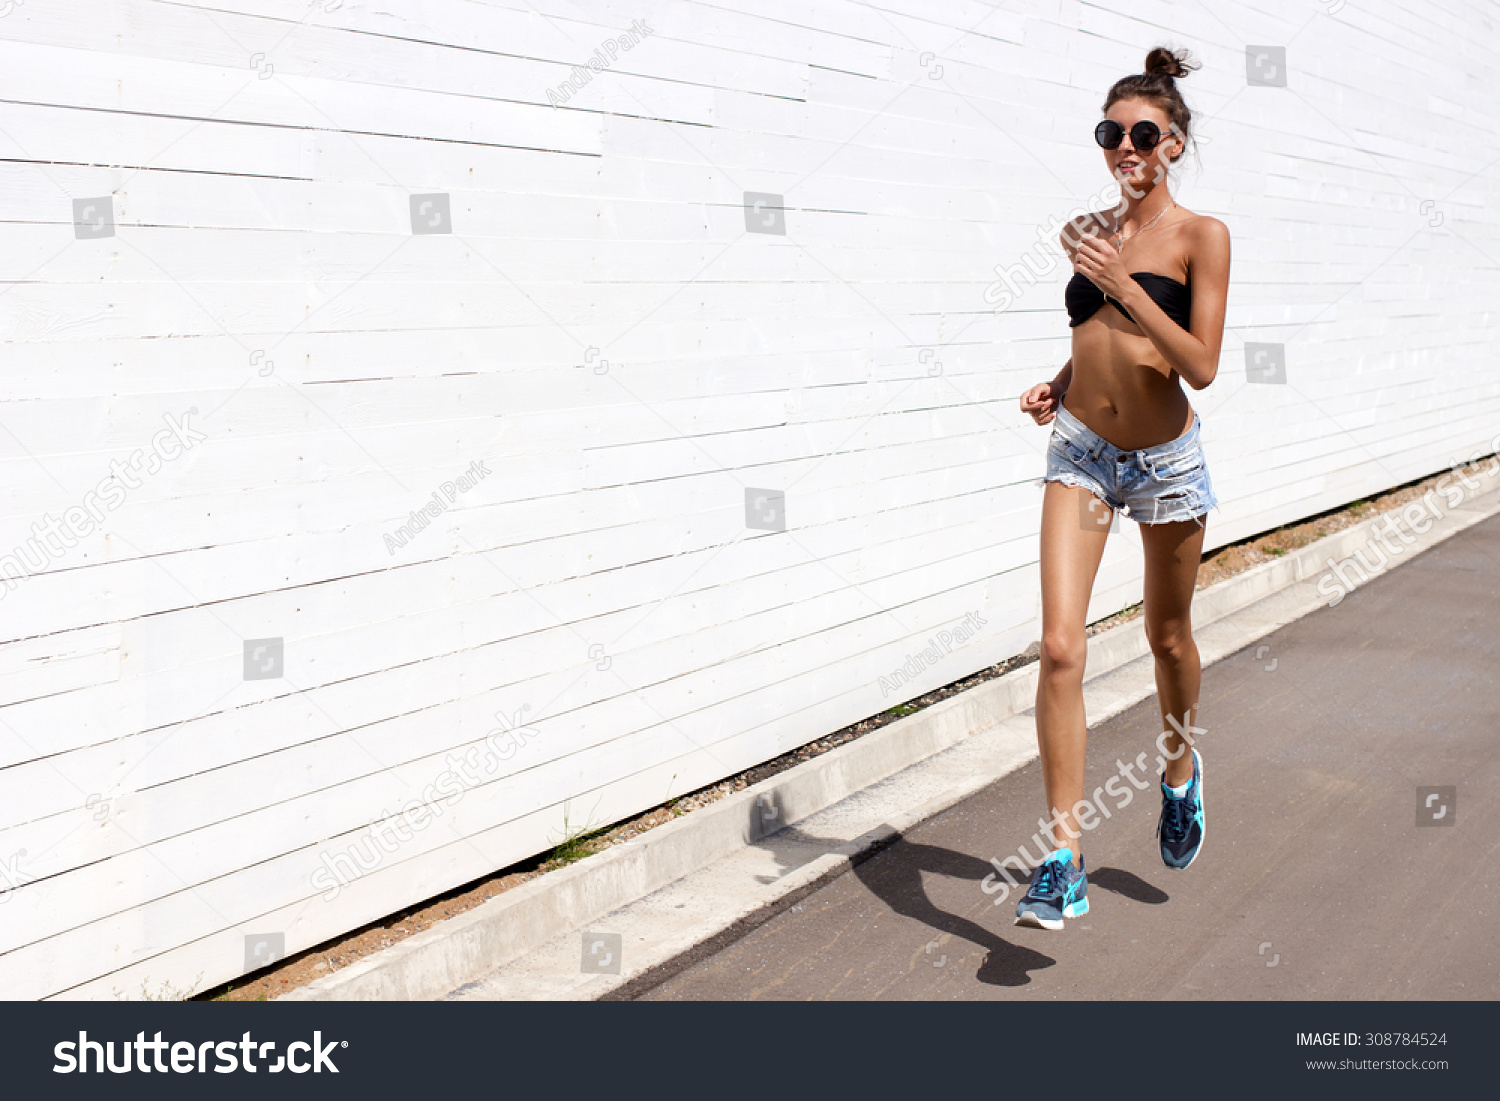 stock-photo-young-european-teenage-brunette-sports-model-running-outdoors-along-white-wooden-wall-jumping-308784524.jpg